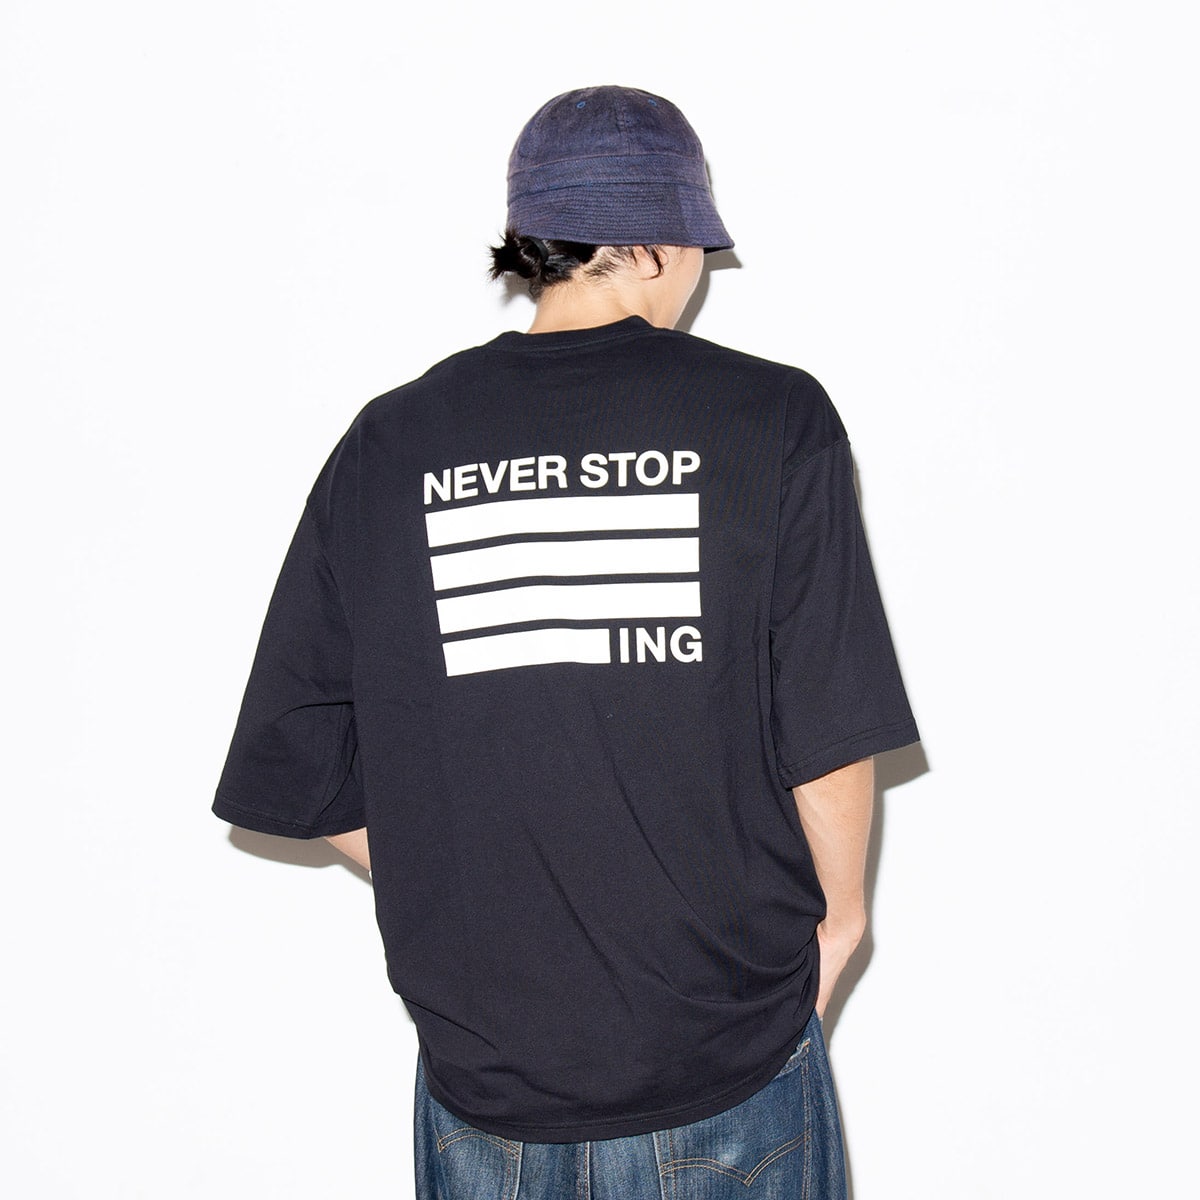 THE NORTH FACE S/S NEVER STOP ING TEE BLACK 23FW-I